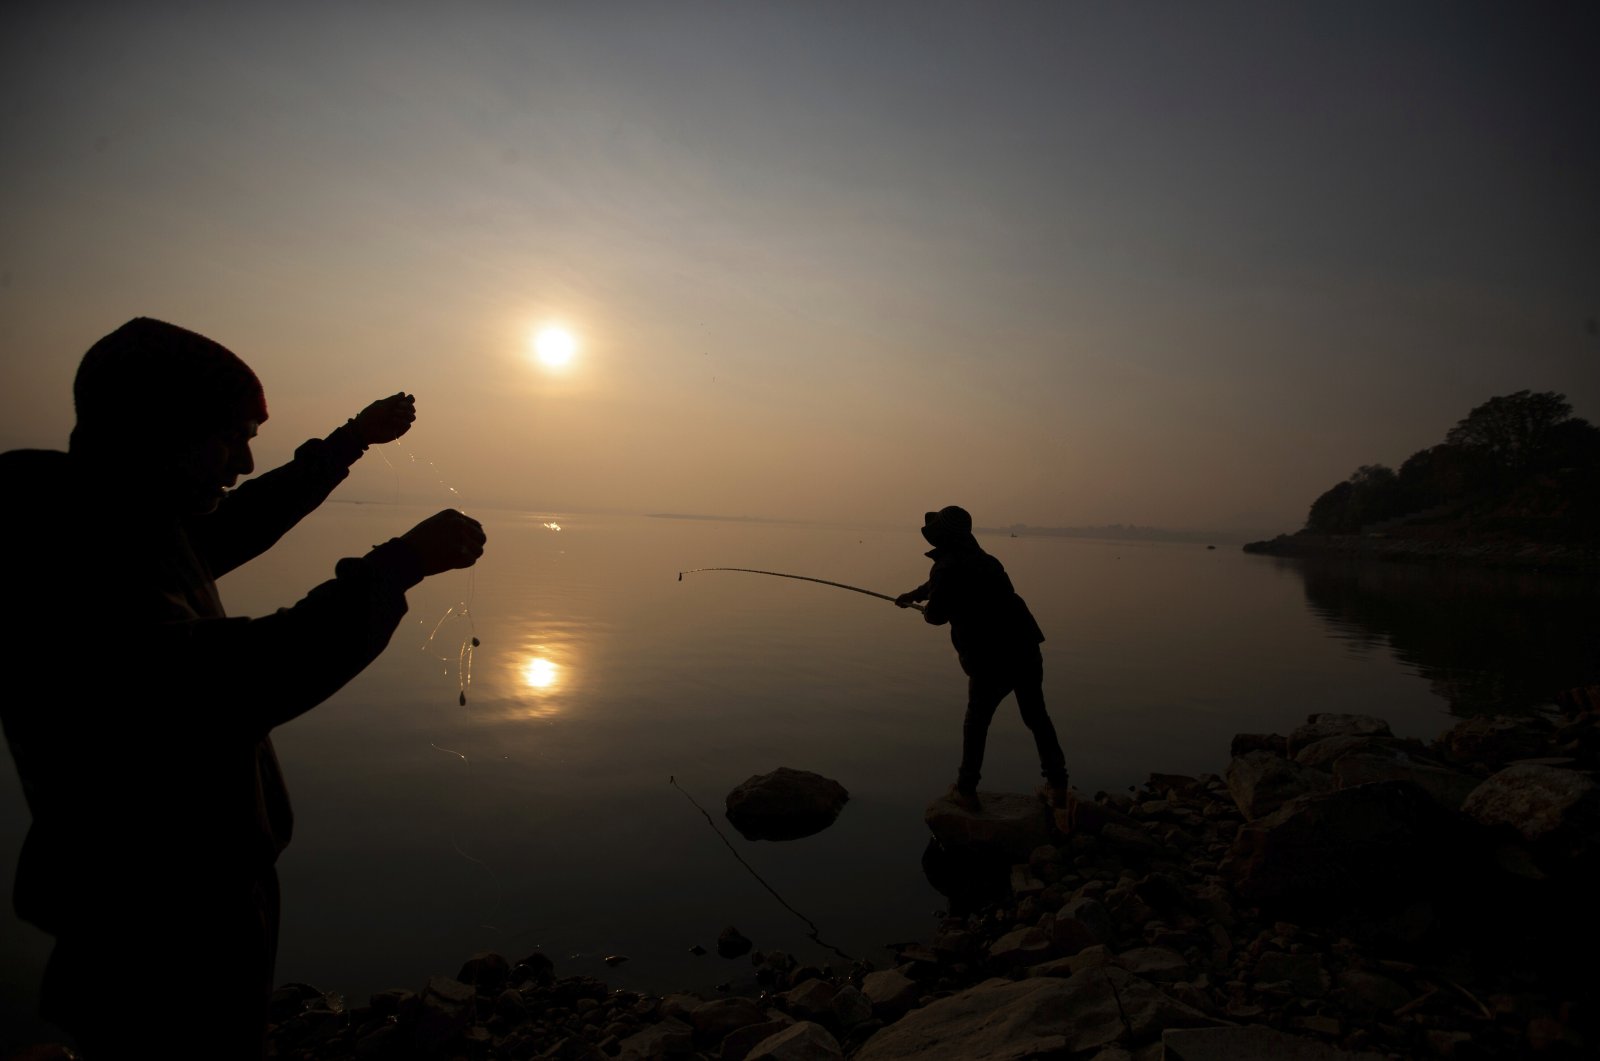 People fish off the banks of the Villa Victoria Dam, the main water supply for Mexico City residents, on the outskirts of Toluca, Mexico, April 22, 2021. (AP Photo)